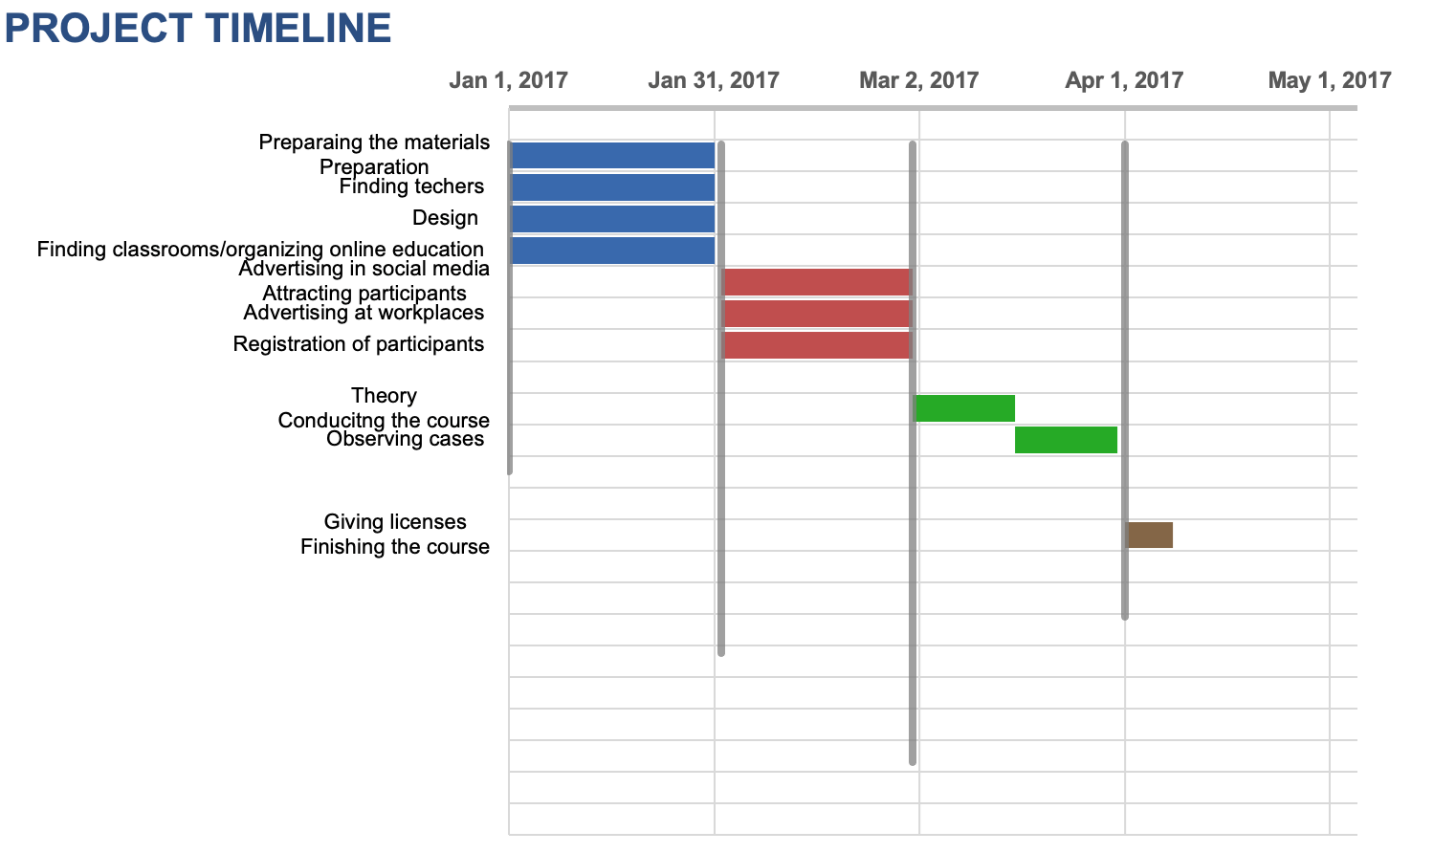 Project Timeline.